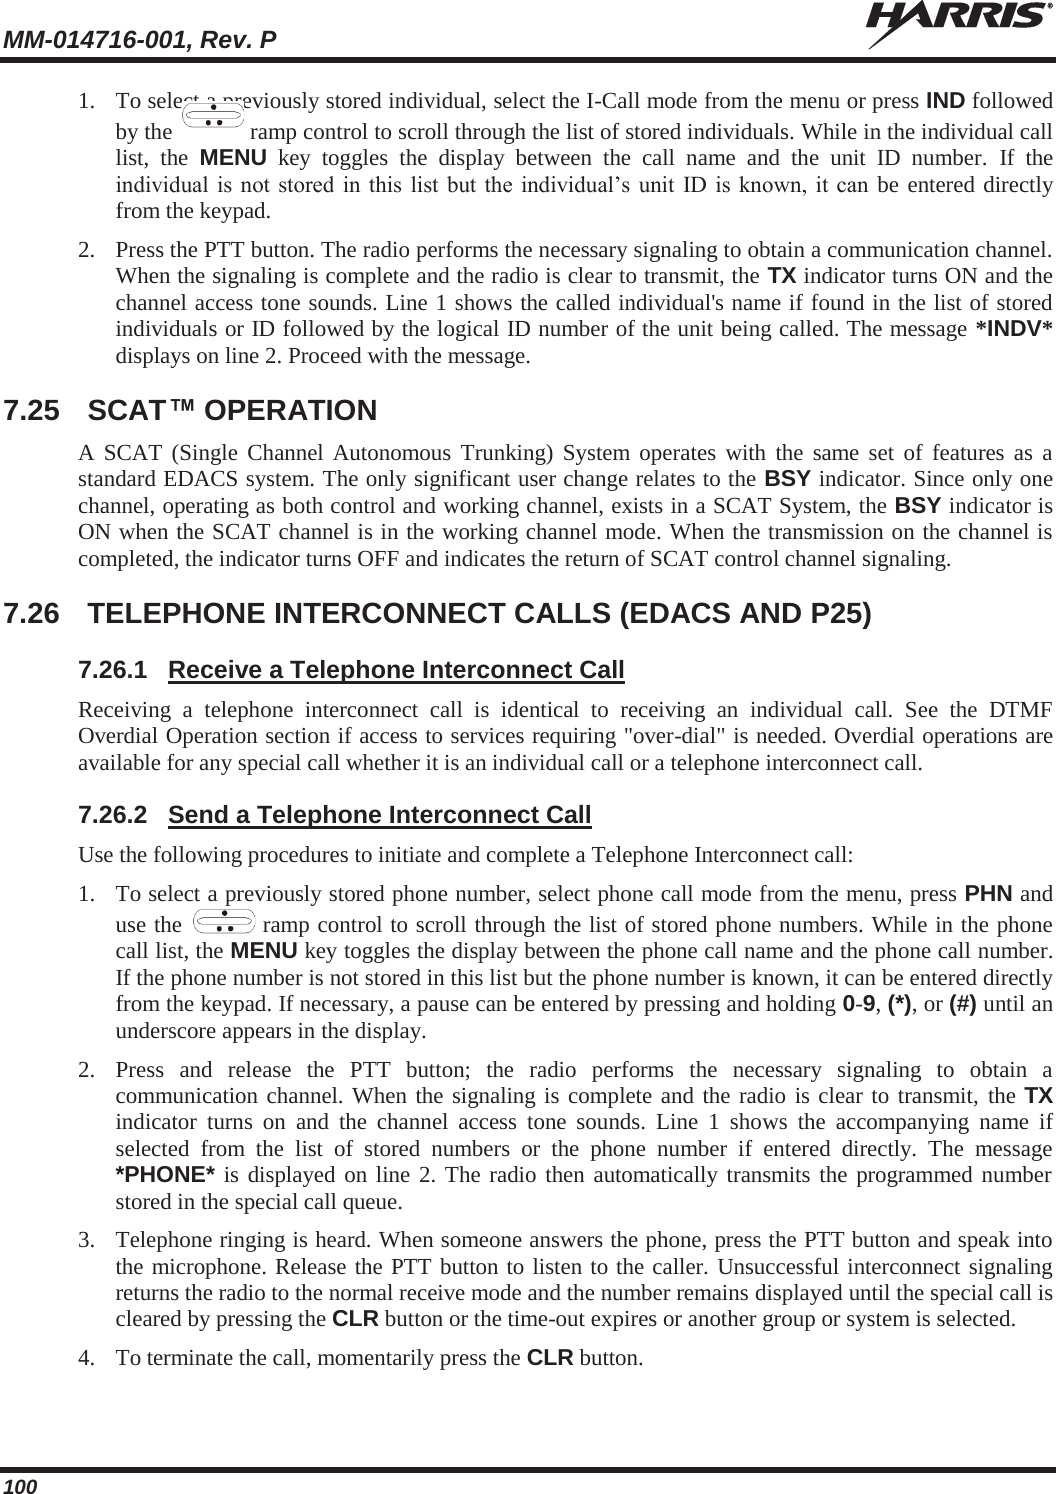 MM-014716-001, Rev. P  100 1. To select a previously stored individual, select the I-Call mode from the menu or press IND followed by the   ramp control to scroll through the list of stored individuals. While in the individual call list, the MENU key toggles the display between the call name and the unit ID number. If the individual is not stored in this list but the individual’s unit ID is known, it can be entered directly from the keypad. 2. Press the PTT button. The radio performs the necessary signaling to obtain a communication channel. When the signaling is complete and the radio is clear to transmit, the TX indicator turns ON and the channel access tone sounds. Line 1 shows the called individual&apos;s name if found in the list of stored individuals or ID followed by the logical ID number of the unit being called. The message *INDV* displays on line 2. Proceed with the message. 7.25 SCAT™ OPERATION A SCAT (Single Channel Autonomous Trunking) System operates with the same set of features as a standard EDACS system. The only significant user change relates to the BSY indicator. Since only one channel, operating as both control and working channel, exists in a SCAT System, the BSY indicator is ON when the SCAT channel is in the working channel mode. When the transmission on the channel is completed, the indicator turns OFF and indicates the return of SCAT control channel signaling. 7.26  TELEPHONE INTERCONNECT CALLS (EDACS AND P25) 7.26.1  Receive a Telephone Interconnect Call Receiving a telephone interconnect call is identical to receiving an individual call. See the DTMF Overdial Operation section if access to services requiring &quot;over-dial&quot; is needed. Overdial operations are available for any special call whether it is an individual call or a telephone interconnect call. 7.26.2  Send a Telephone Interconnect Call Use the following procedures to initiate and complete a Telephone Interconnect call: 1. To select a previously stored phone number, select phone call mode from the menu, press PHN and use the   ramp control to scroll through the list of stored phone numbers. While in the phone call list, the MENU key toggles the display between the phone call name and the phone call number. If the phone number is not stored in this list but the phone number is known, it can be entered directly from the keypad. If necessary, a pause can be entered by pressing and holding 0-9, (*), or (#) until an underscore appears in the display. 2. Press and release the PTT button; the radio performs the necessary signaling to obtain a communication channel. When the signaling is complete and the radio is clear to transmit, the TX indicator turns on and the channel access tone sounds. Line 1 shows the accompanying name if selected from the list of stored numbers or the phone number if entered directly. The message *PHONE* is displayed on line 2. The radio then automatically transmits the programmed number stored in the special call queue. 3. Telephone ringing is heard. When someone answers the phone, press the PTT button and speak into the microphone. Release the PTT button to listen to the caller. Unsuccessful interconnect signaling returns the radio to the normal receive mode and the number remains displayed until the special call is cleared by pressing the CLR button or the time-out expires or another group or system is selected. 4. To terminate the call, momentarily press the CLR button.  